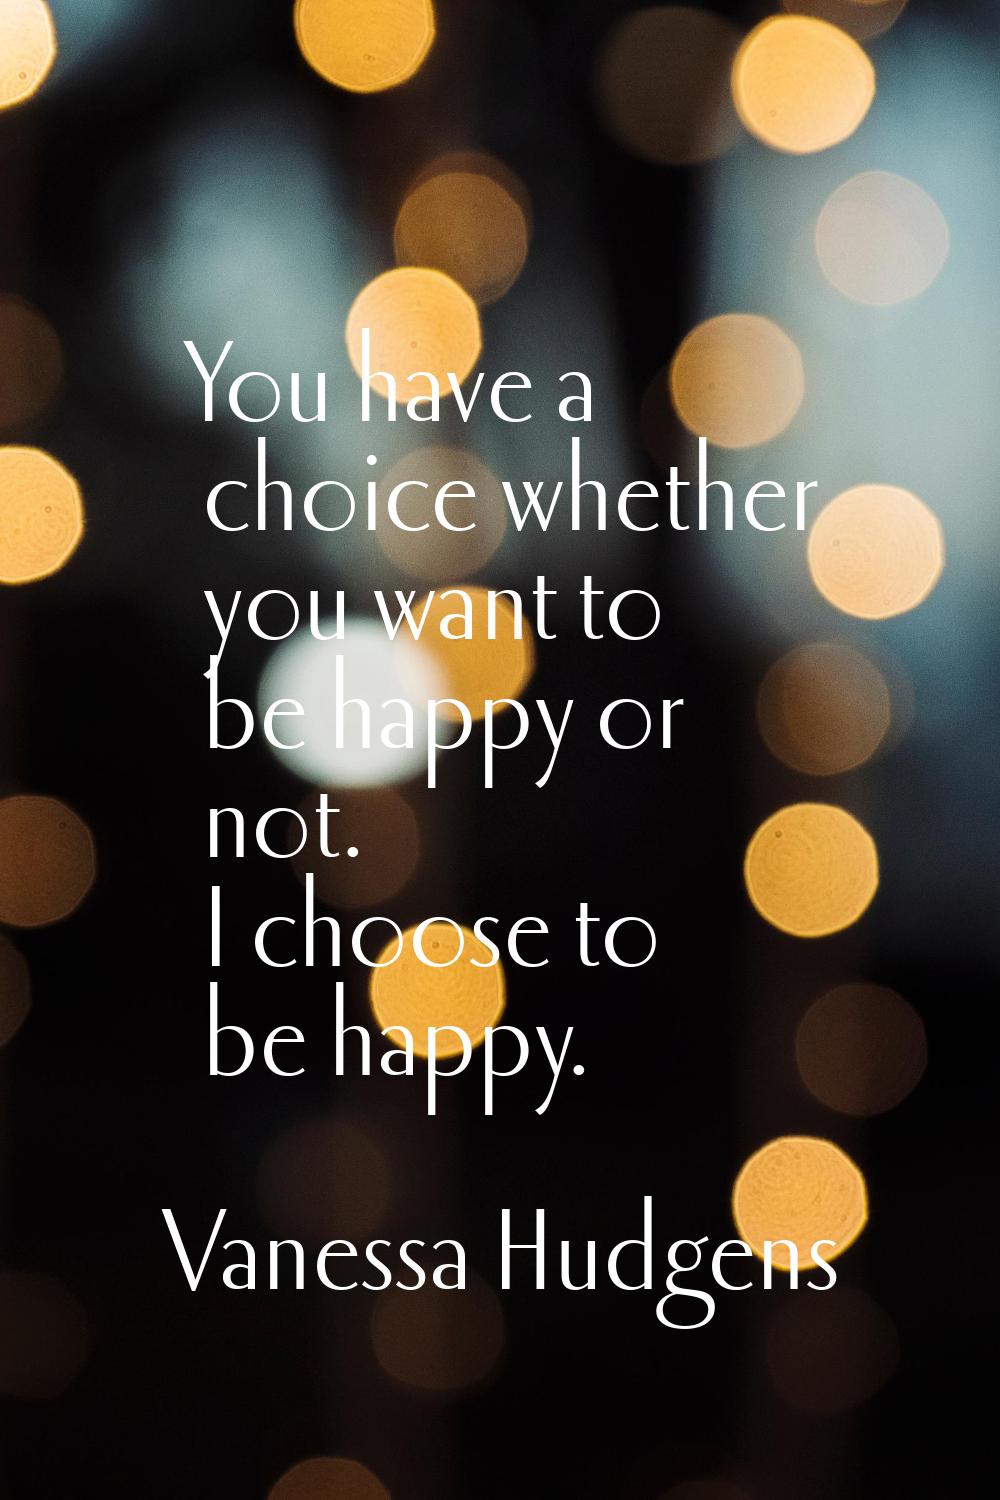 You have a choice whether you want to be happy or not. I choose to be happy.